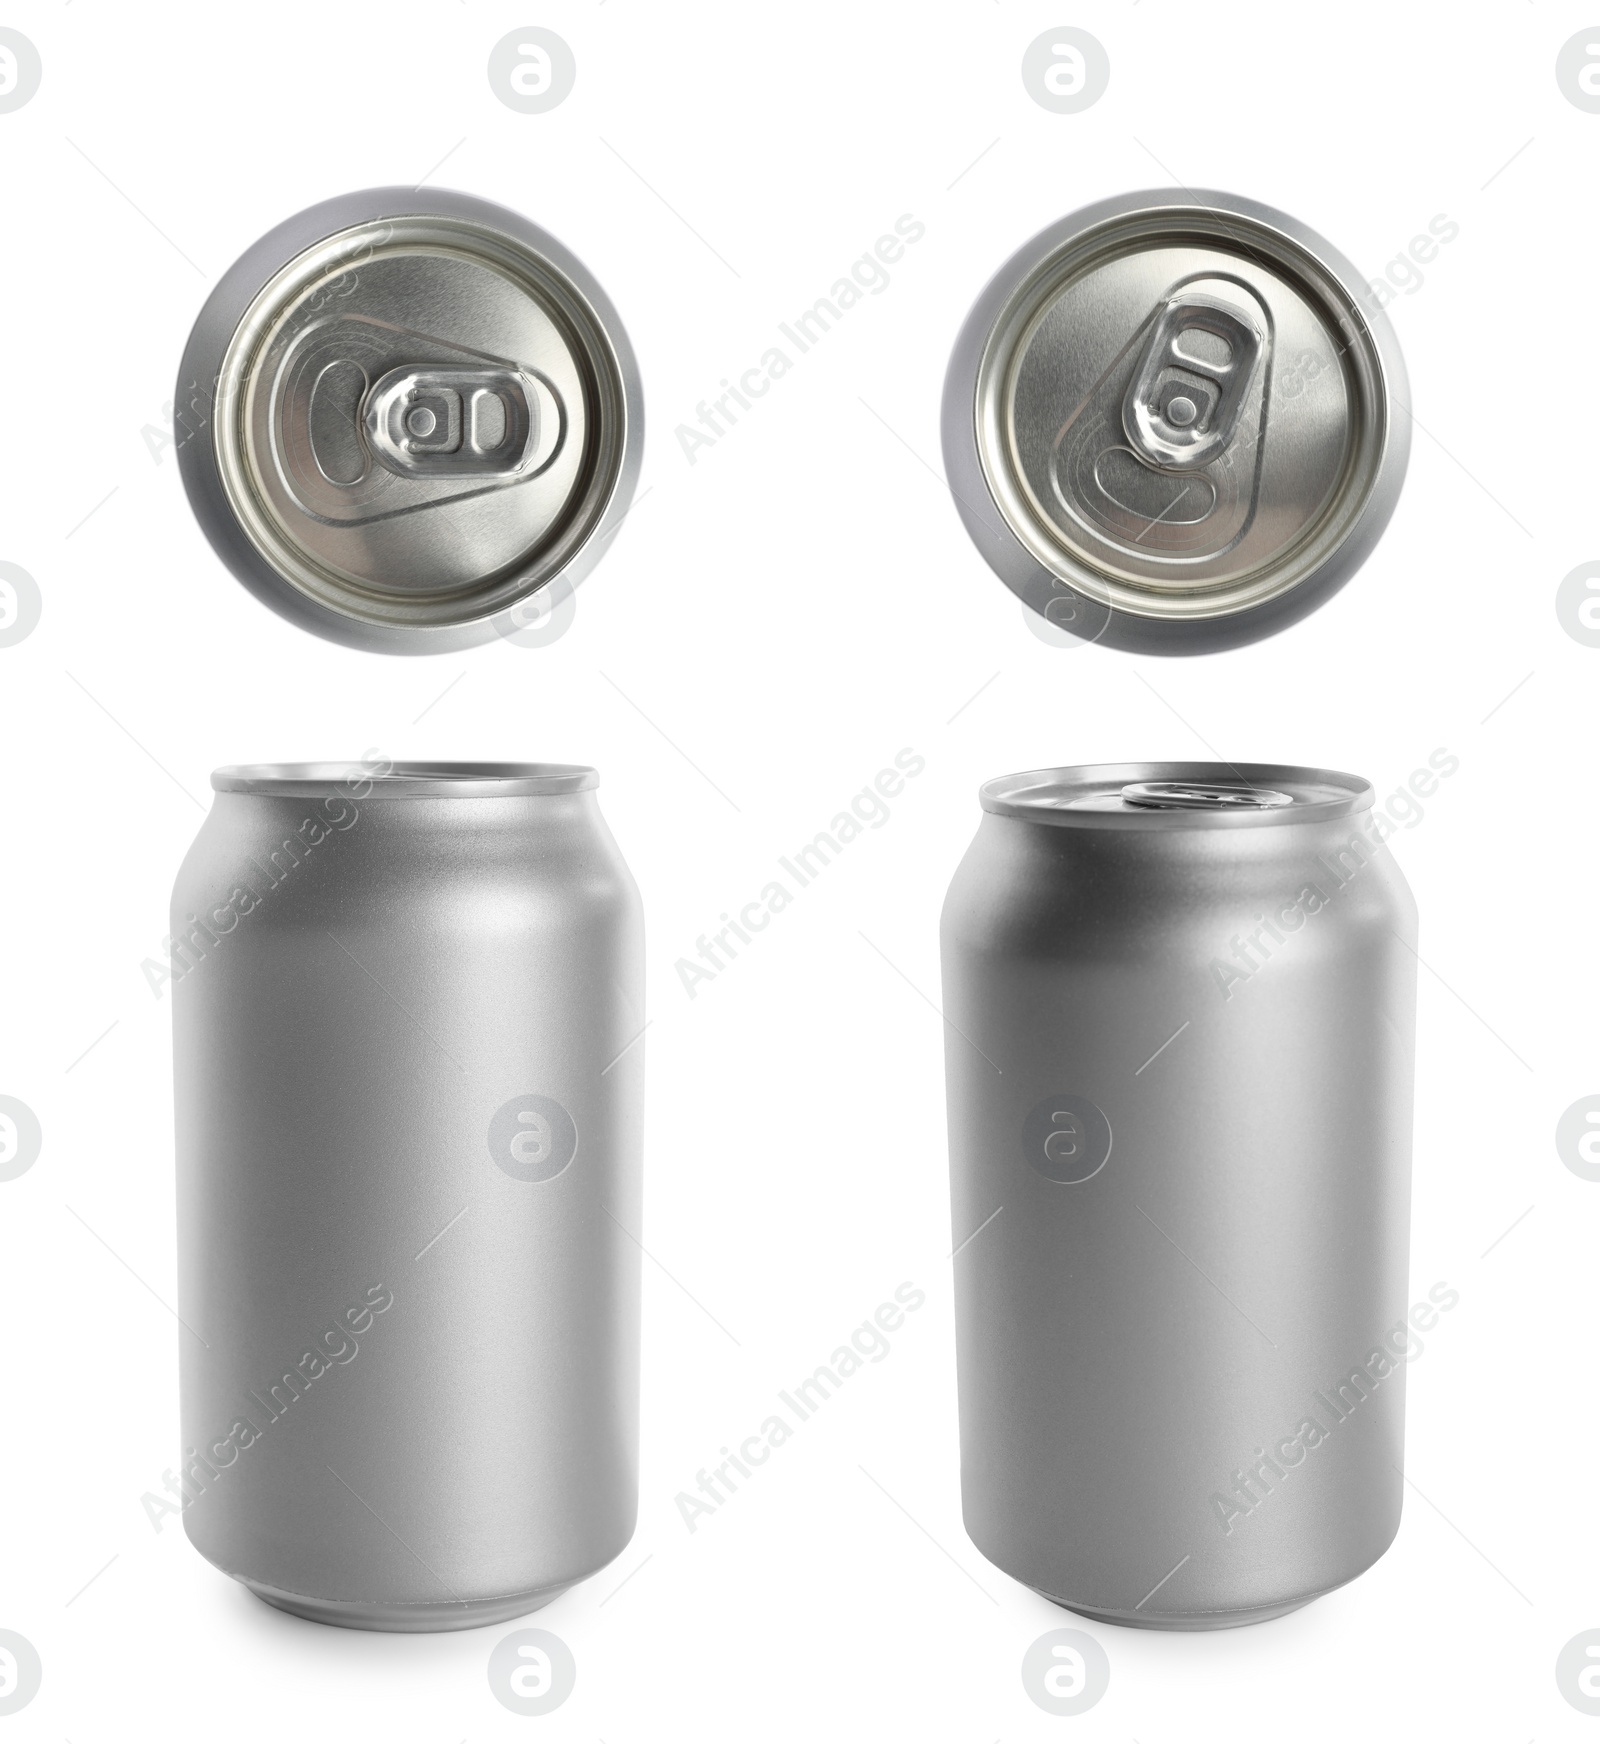 Image of Set with aluminum beverage cans on white background